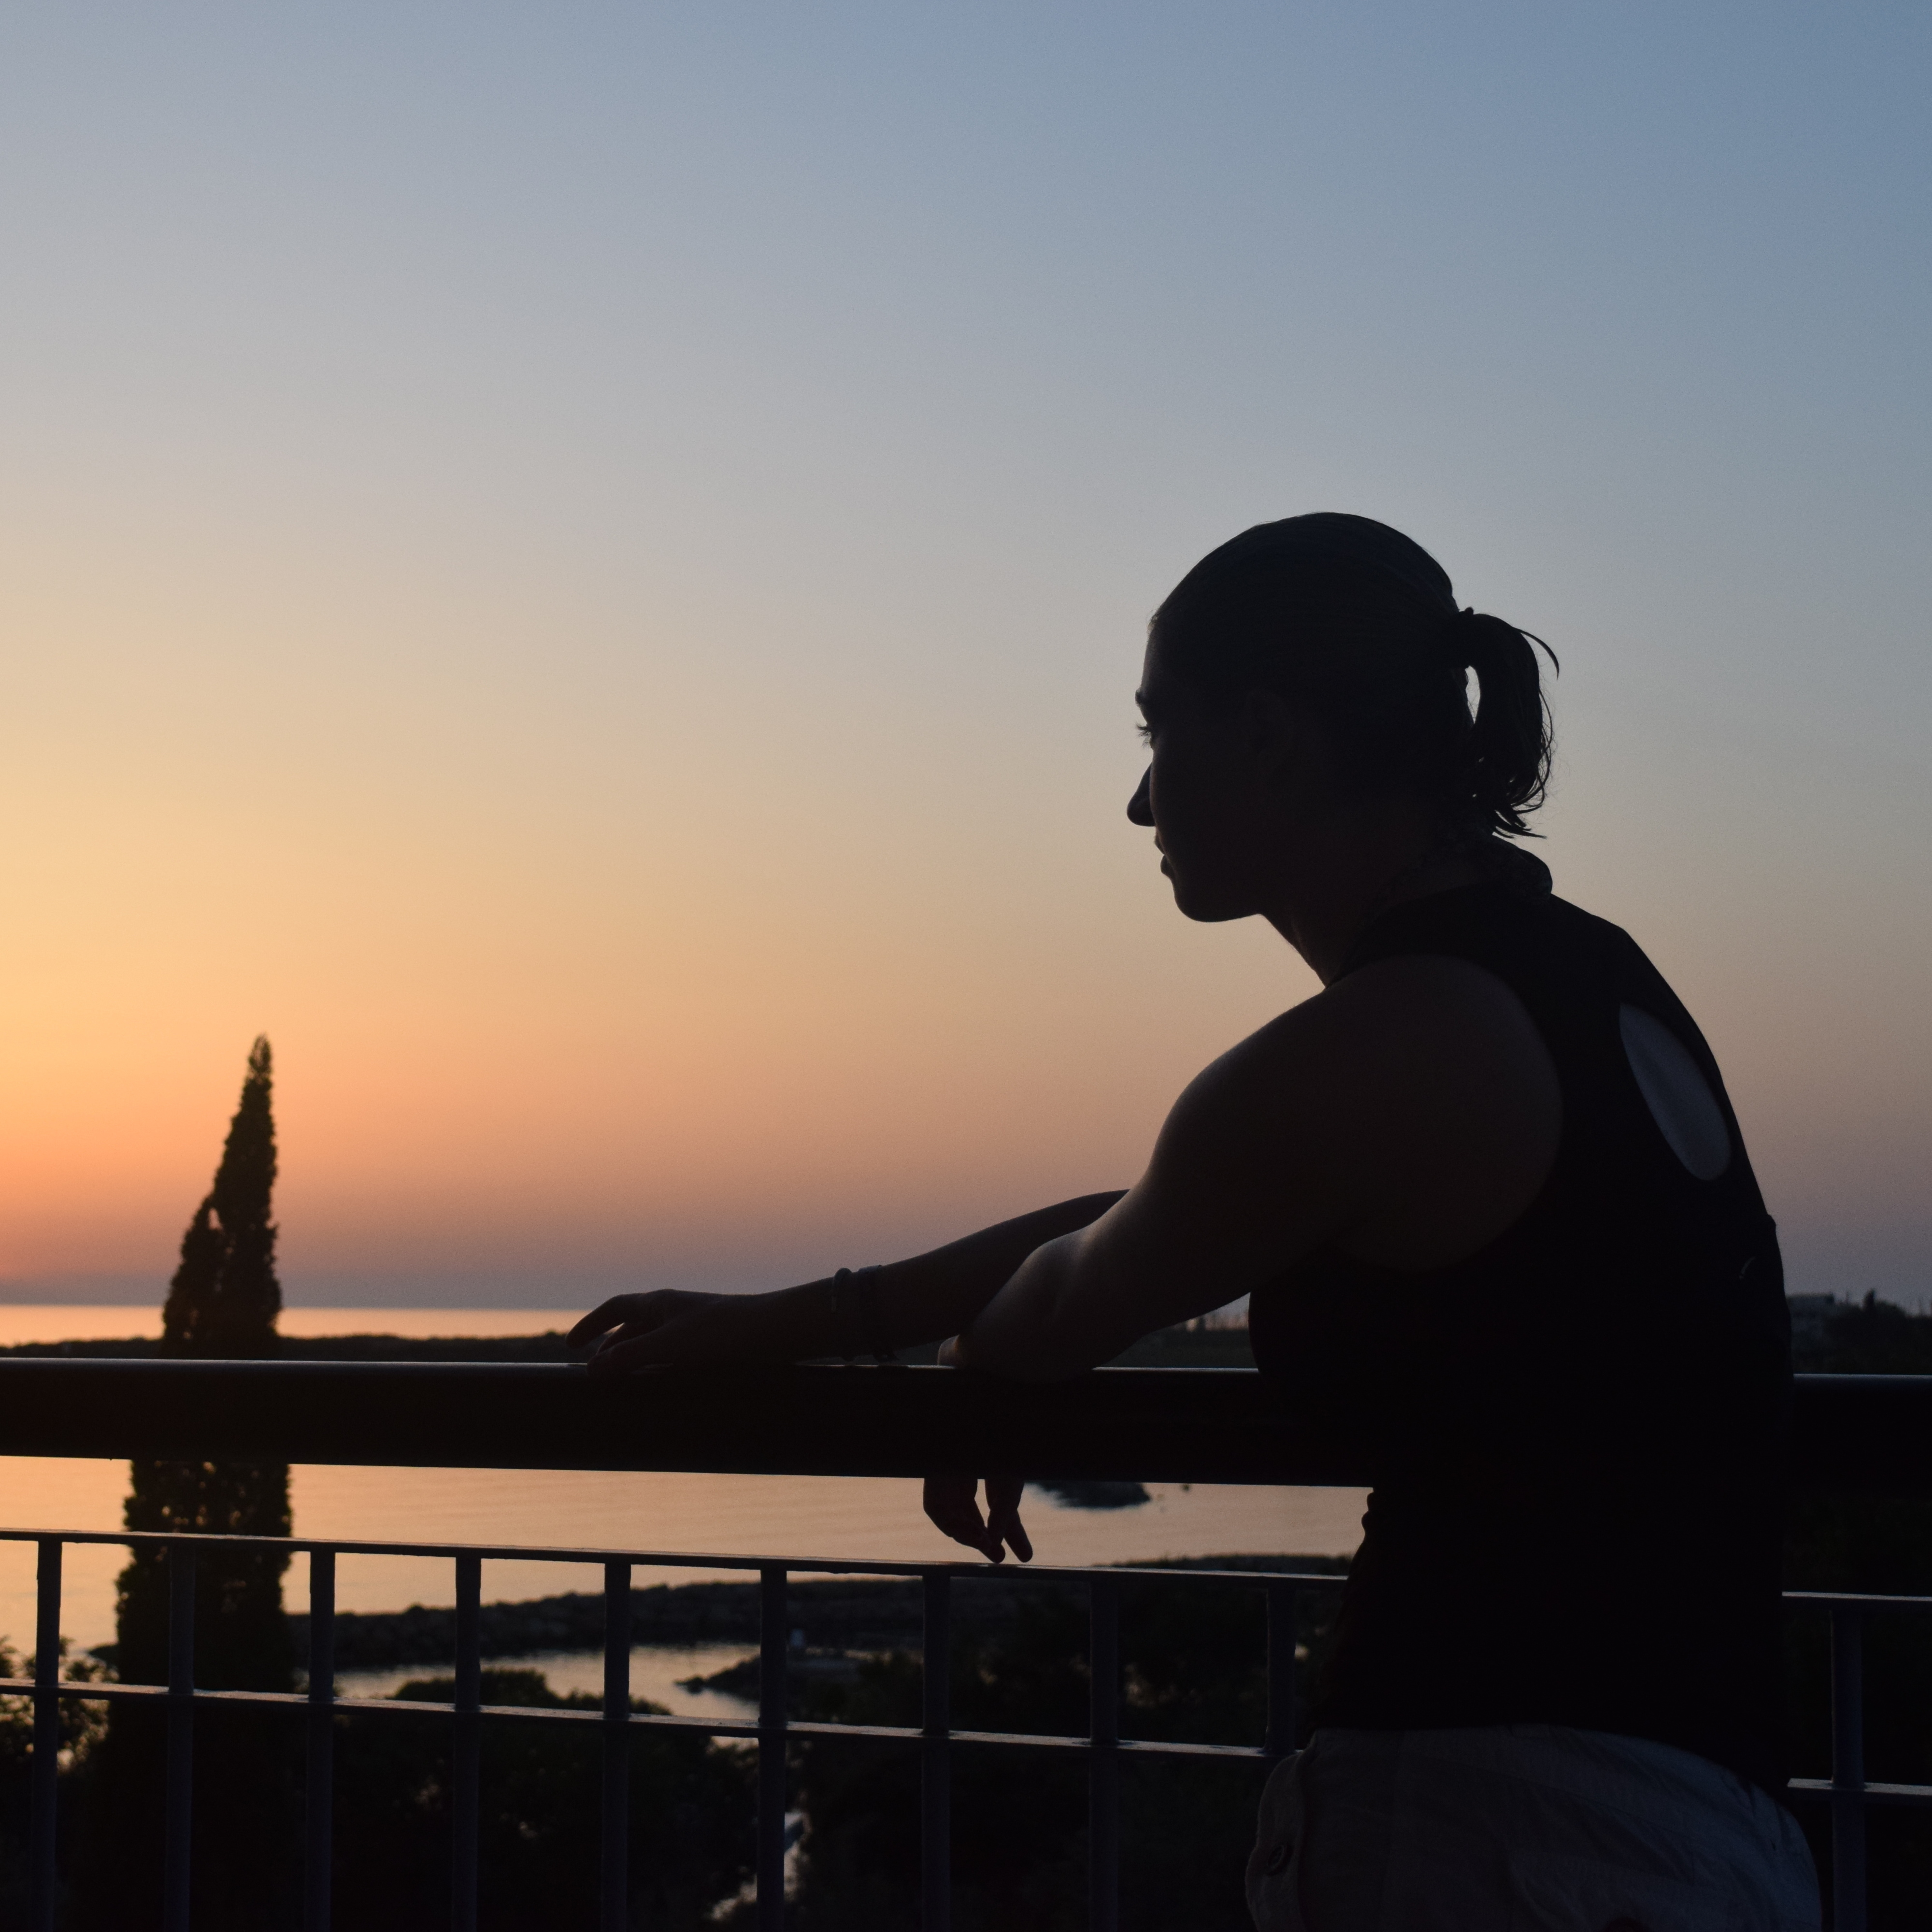 silhouette of a woman standing on a balcony overlooking a lake at sunset